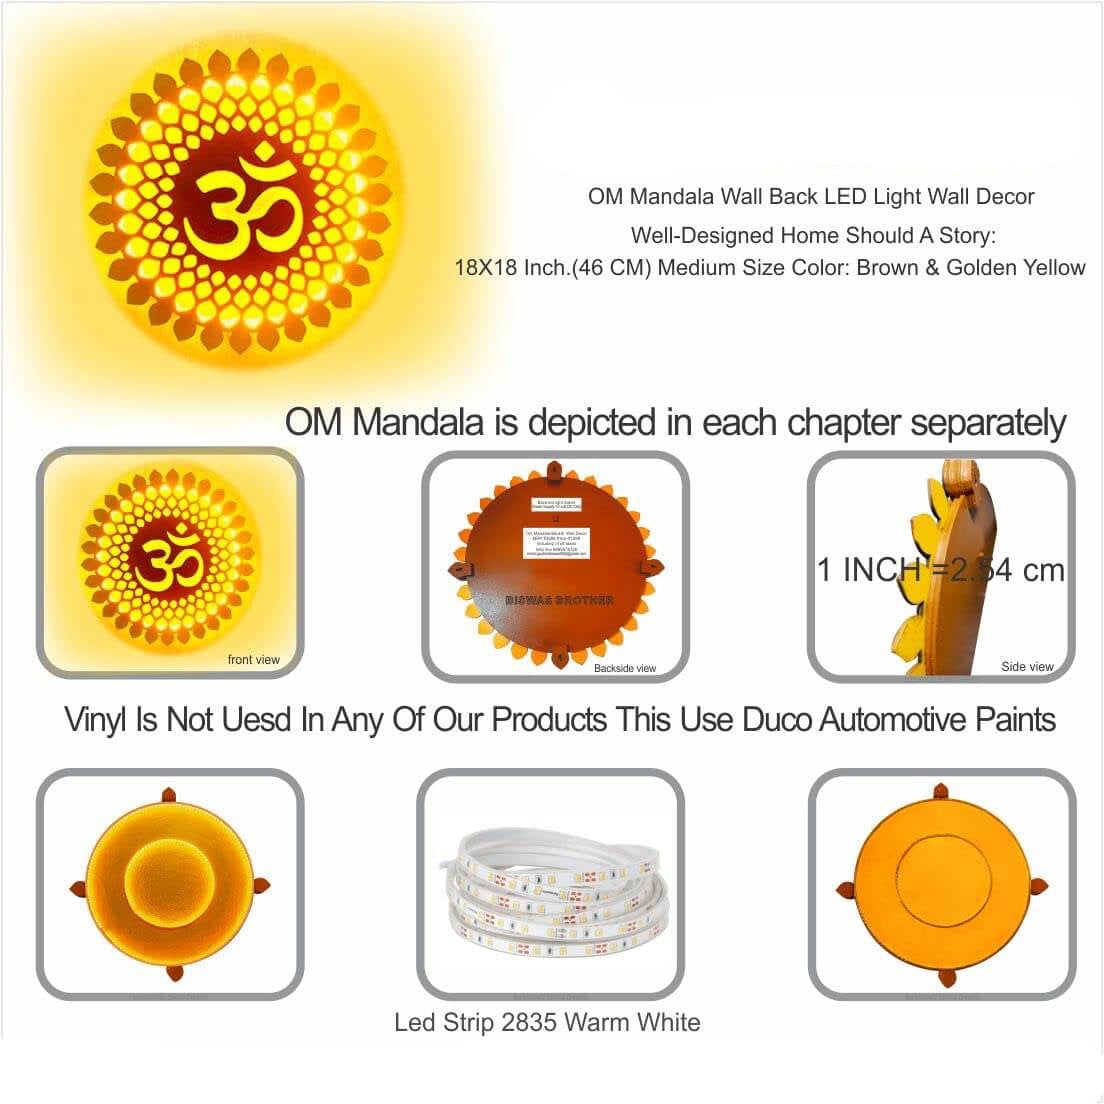 OM Mandala Wall Decor with Back LED (18 x 18 Inch, Color: Brown & Golden Yellow) Mangal Fashions | Indian Home Decor and Craft